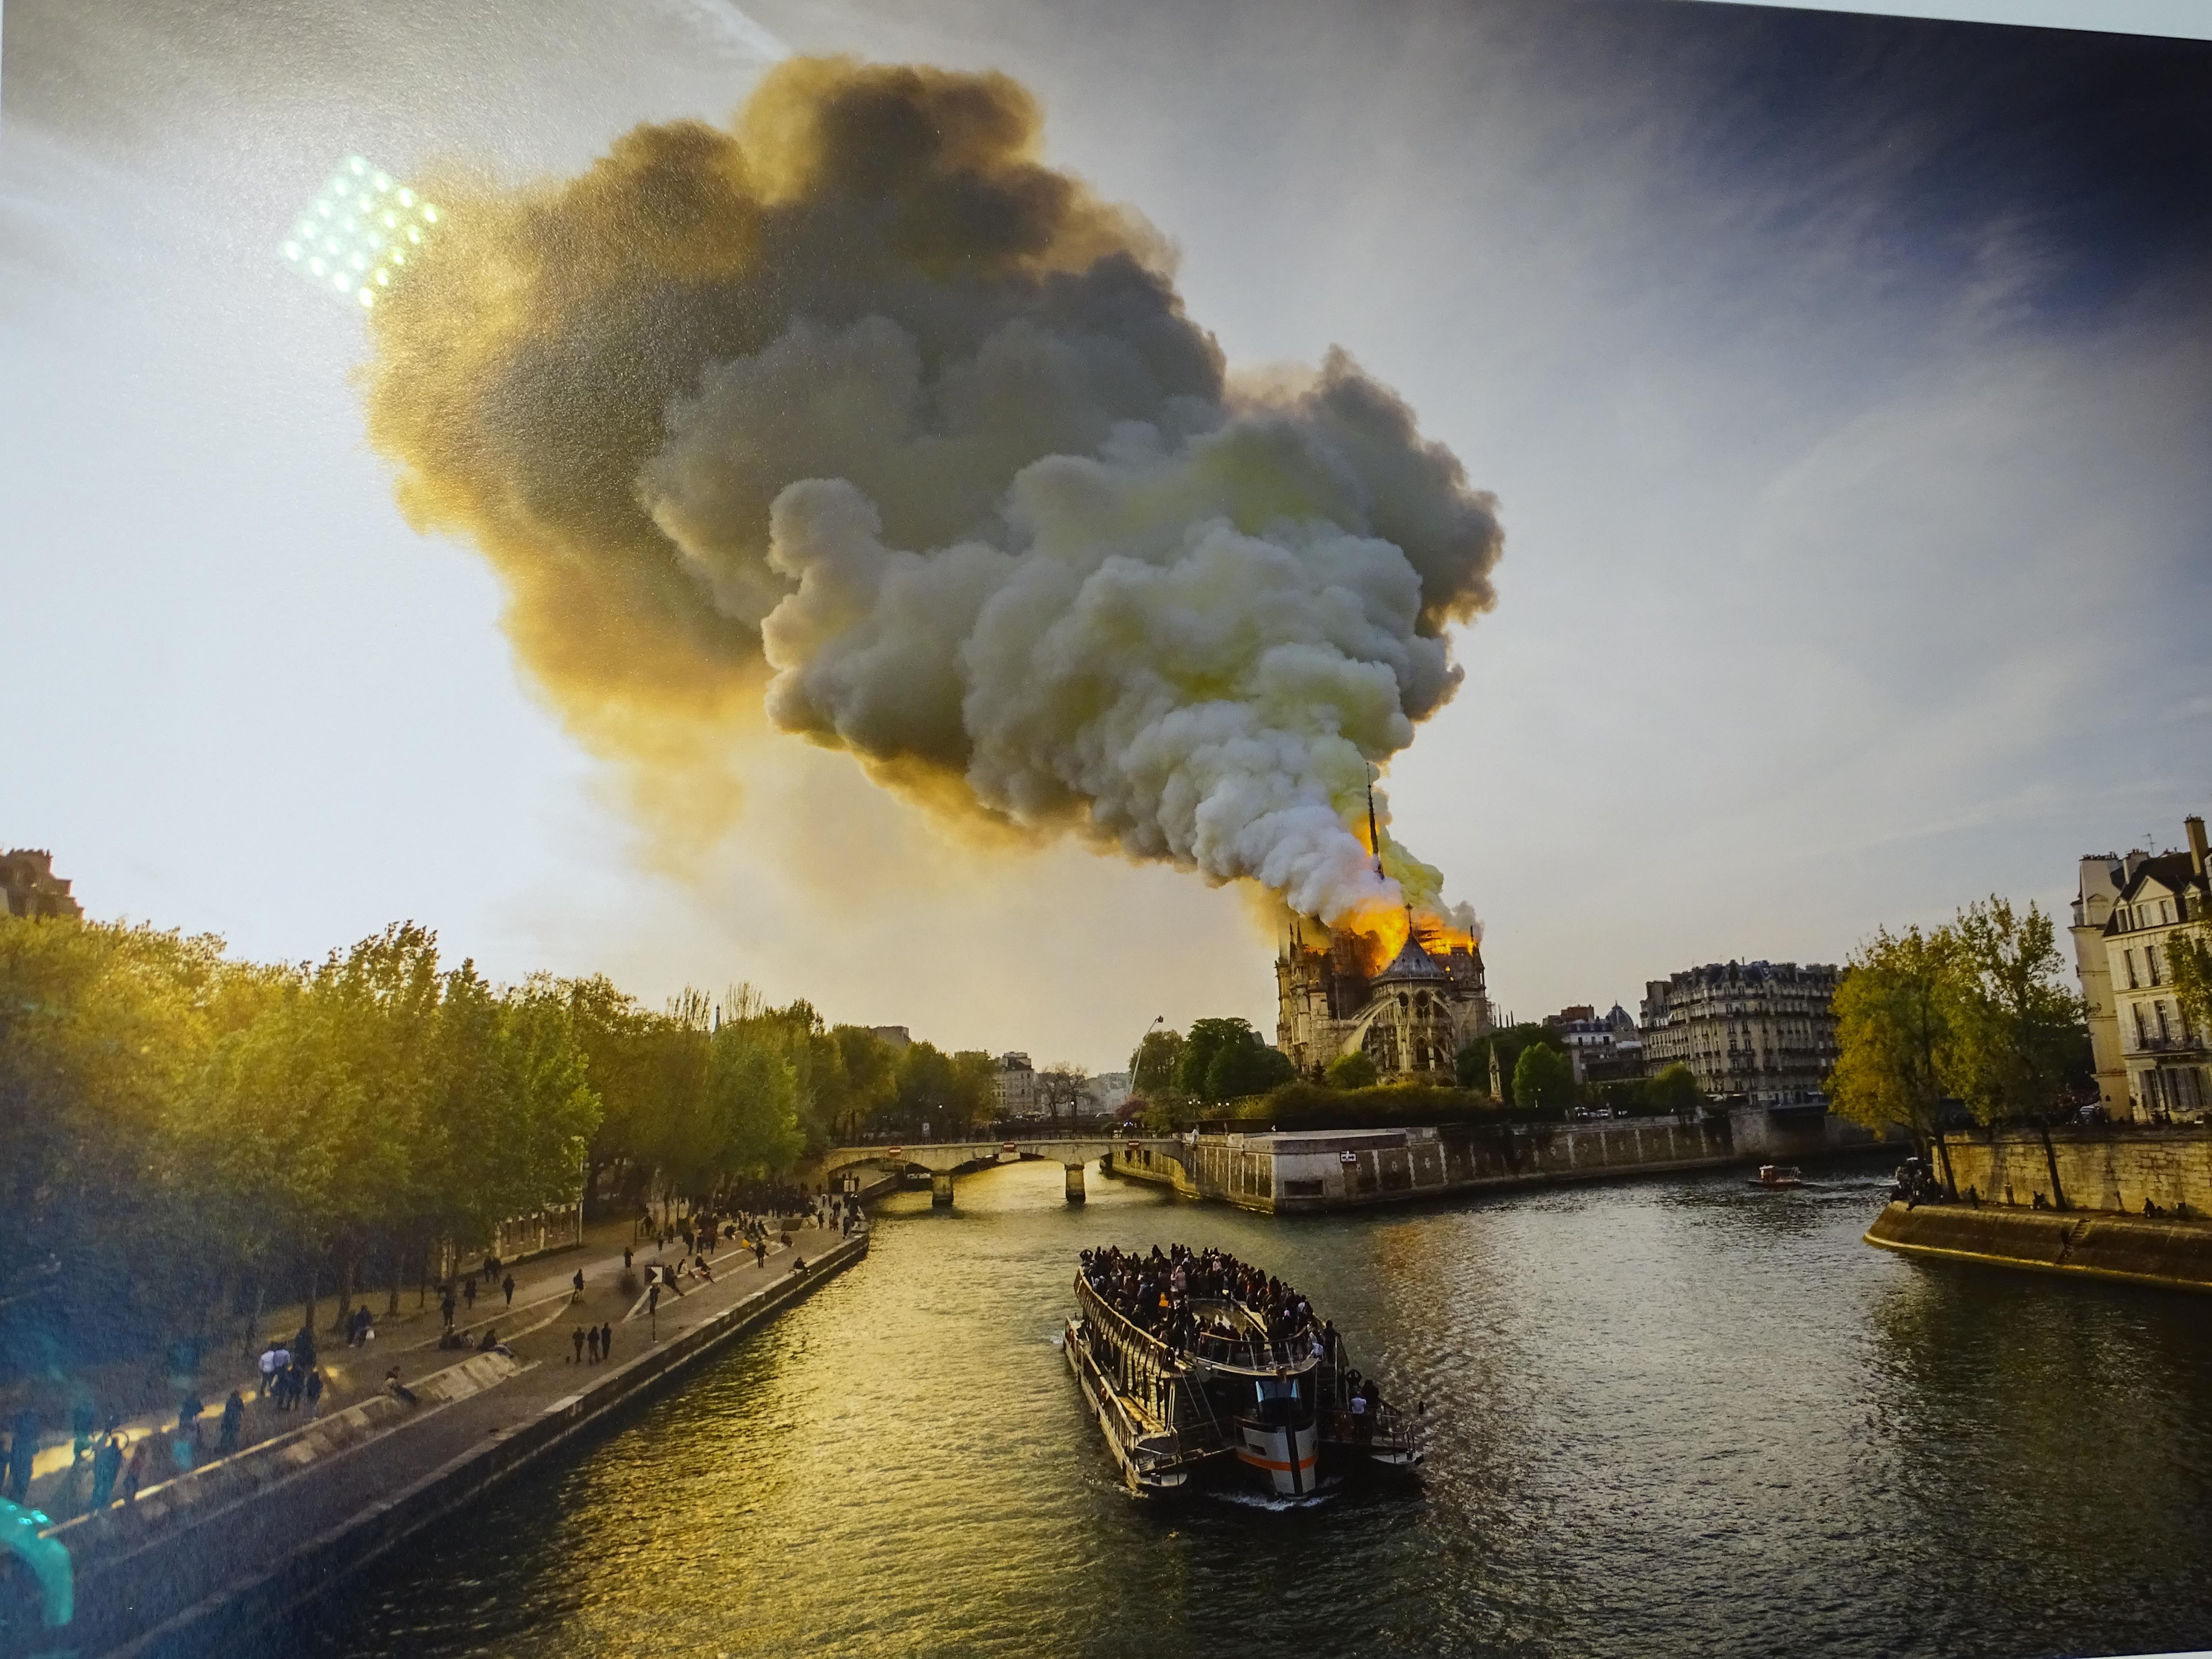 Amazing and unique digital French printing in platinum palladium by Gilles BASSIGNAC
Notre Dame Cathedral fire, Paris, France, 15th April 2019
Digital print on 315 g Hanemulhe Rag Baryta fine art paper
Measures: 50 x 70
Born in Angers in 1961,